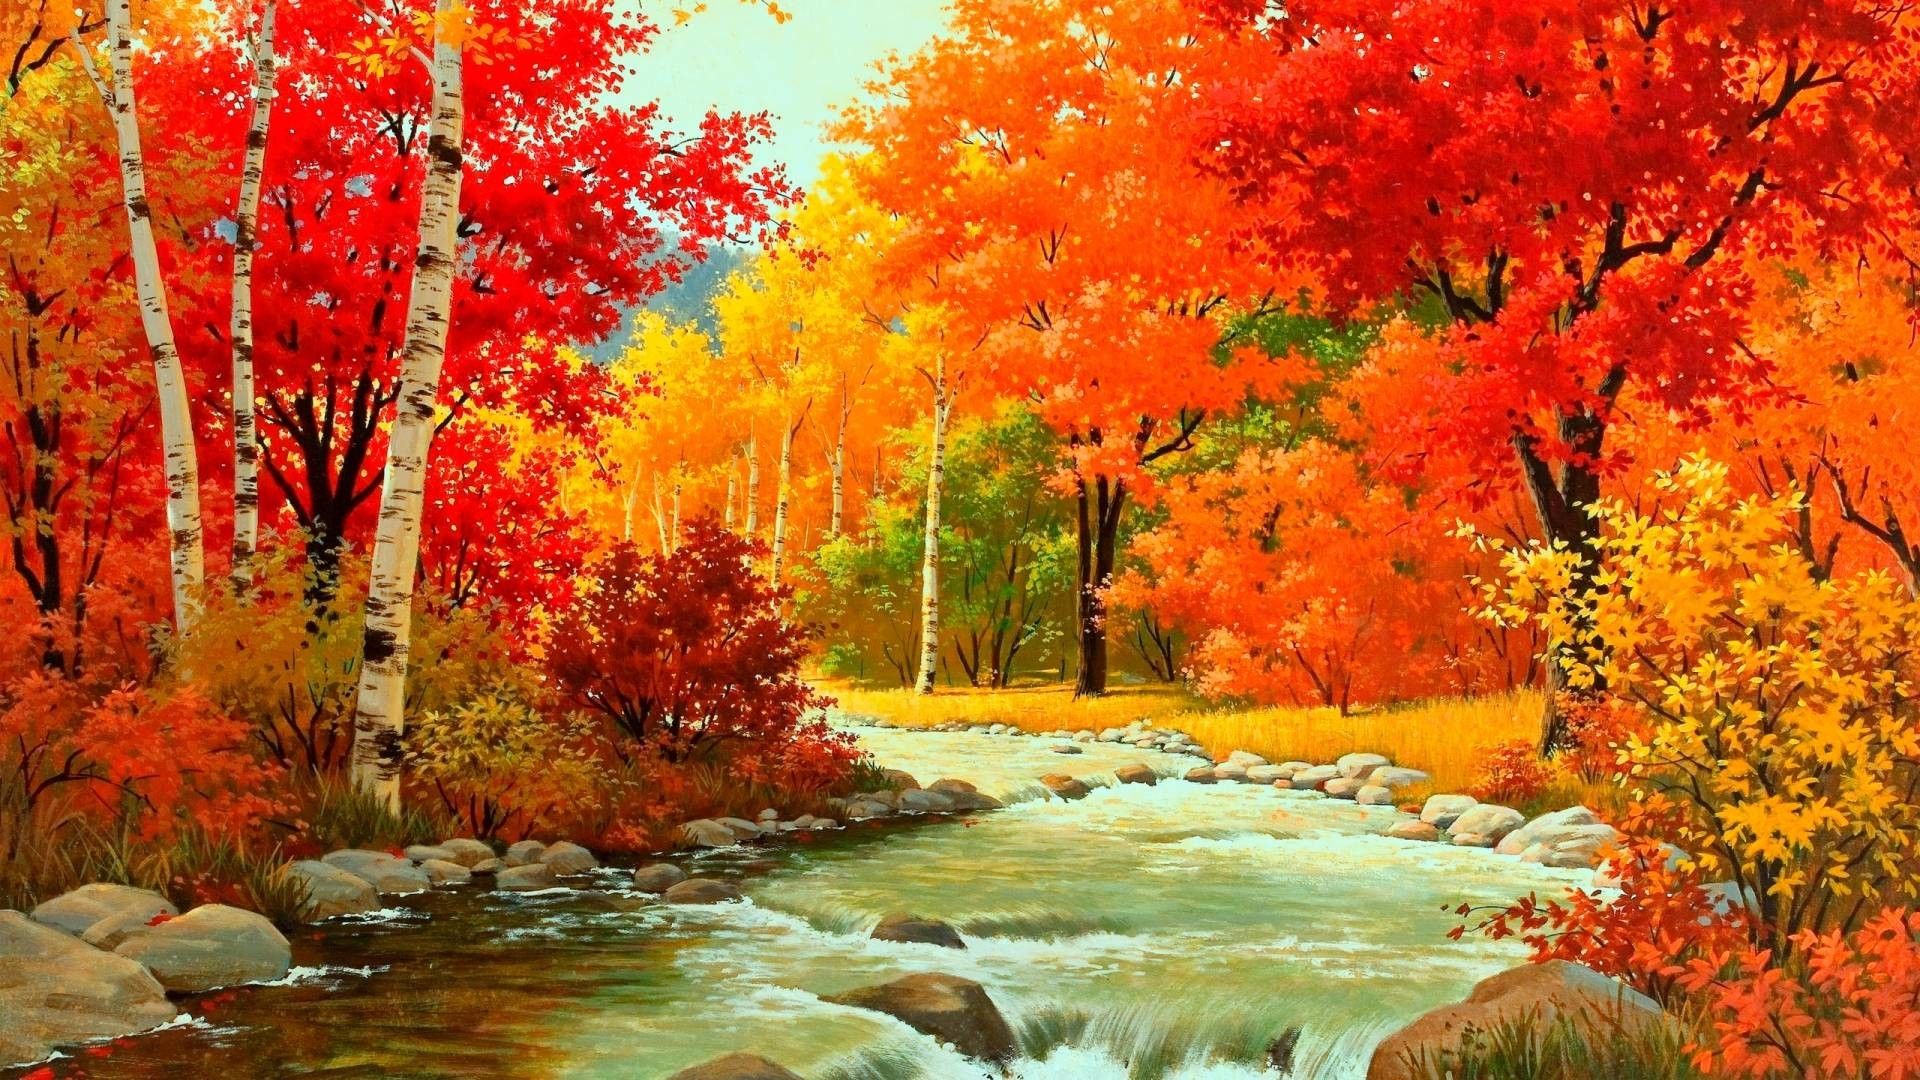 Hd Wallpapers 1080p Nature Autumn